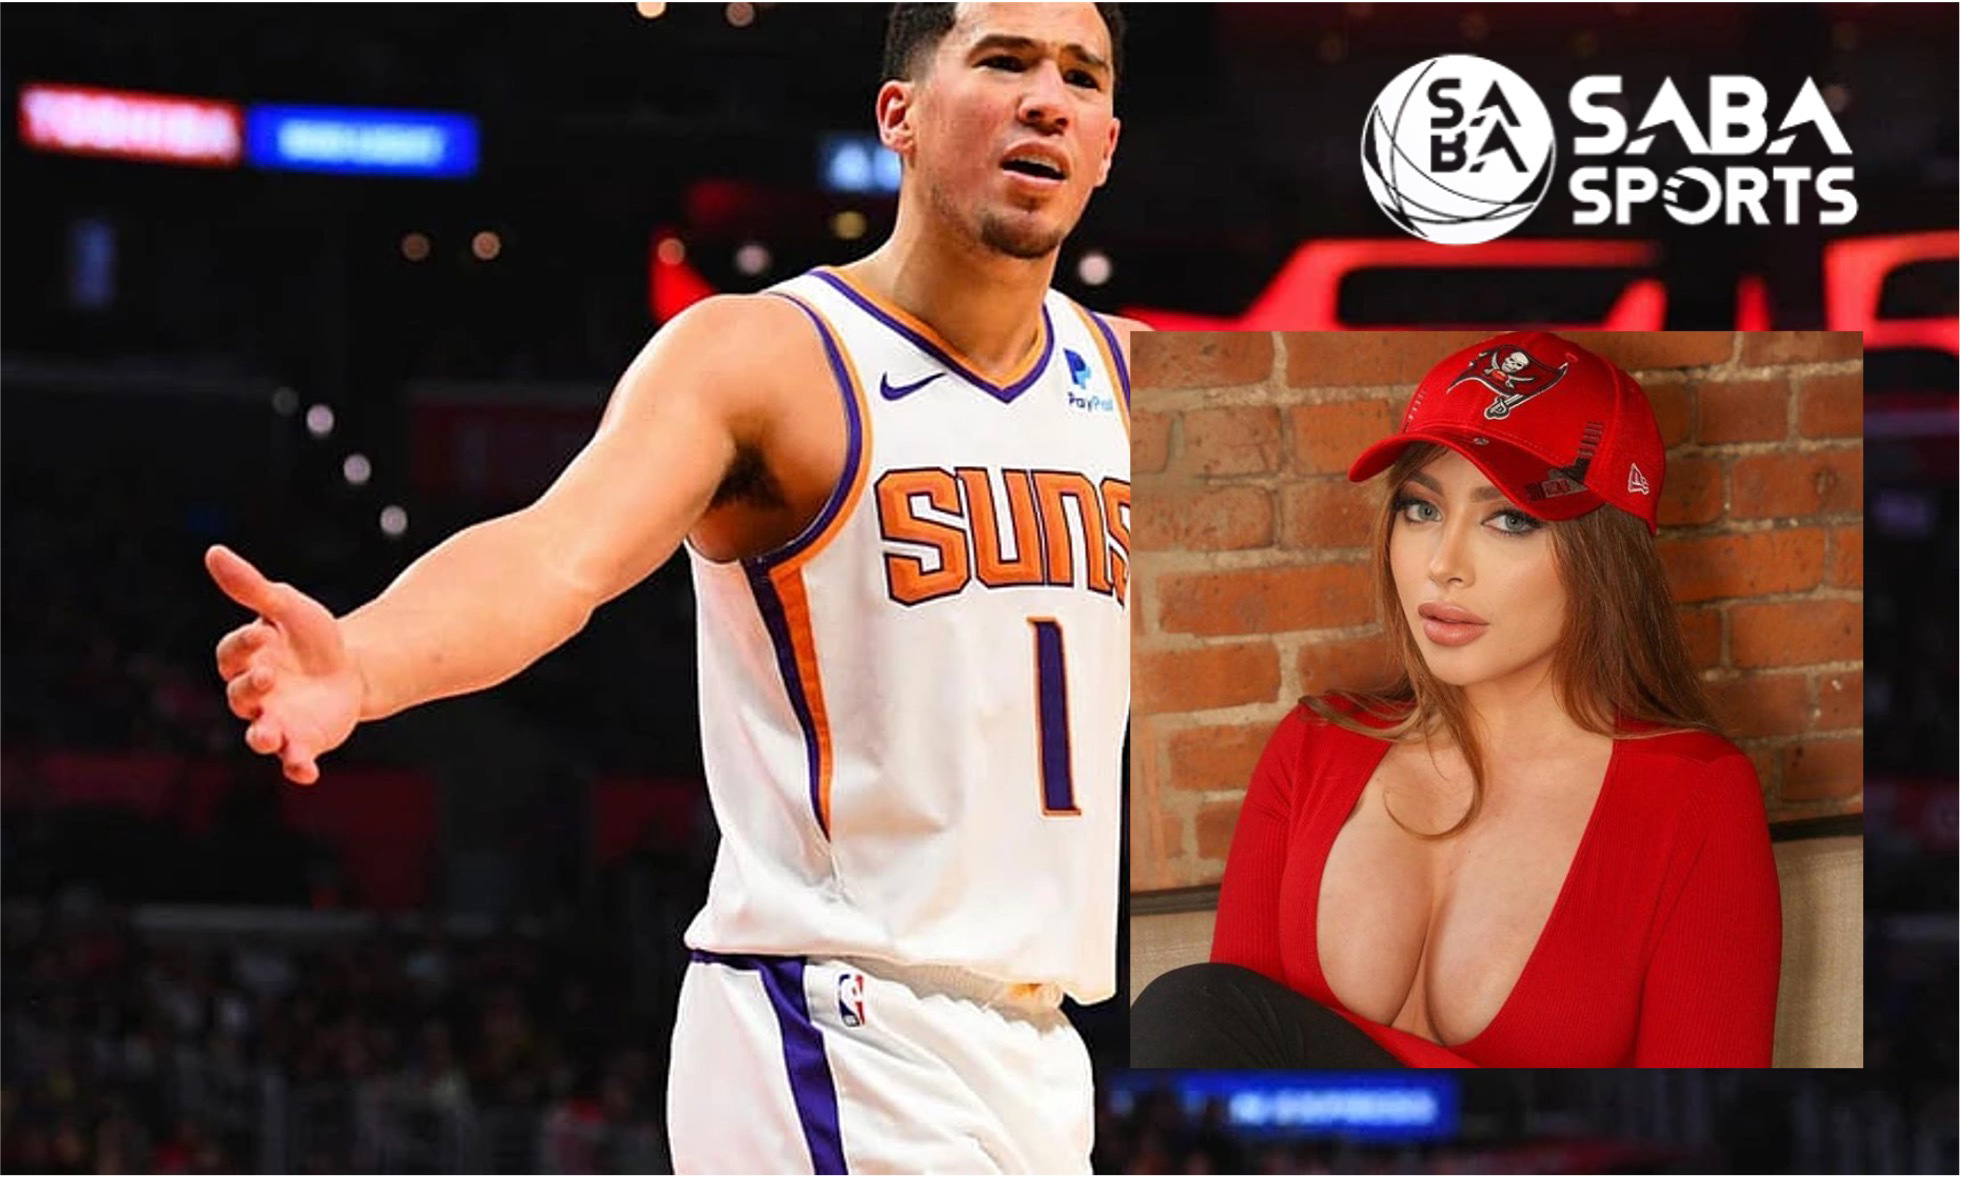 Porn Star Who Exposed Antonio Brown Now Has Eyes On NBA Star Devin Booker  As Her Next Reveal